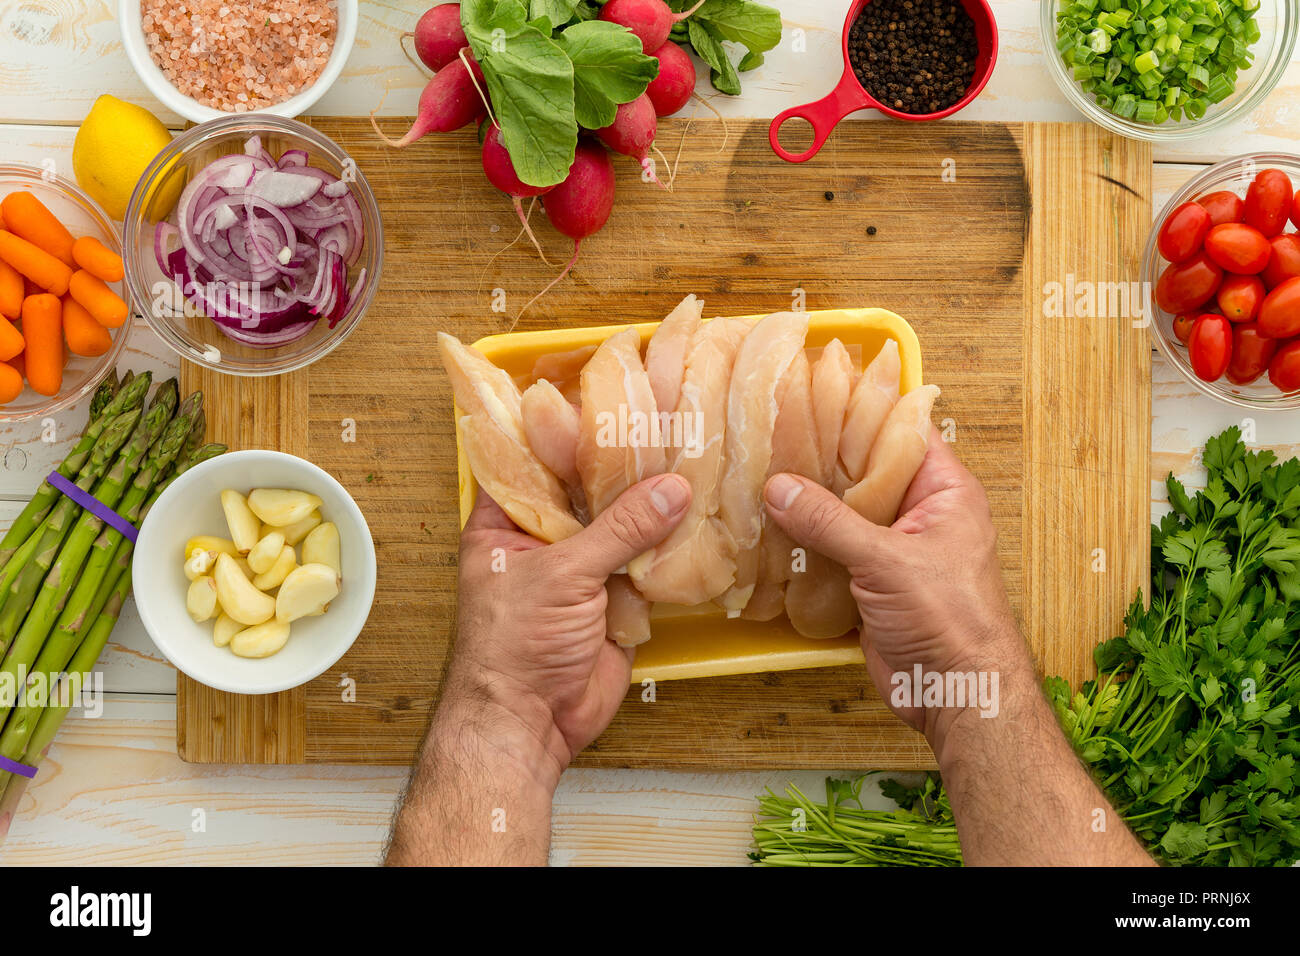 Chef preparing chicken strips with vegetables and seasonings on cutting board for dinner perhaps lunch Stock Photo